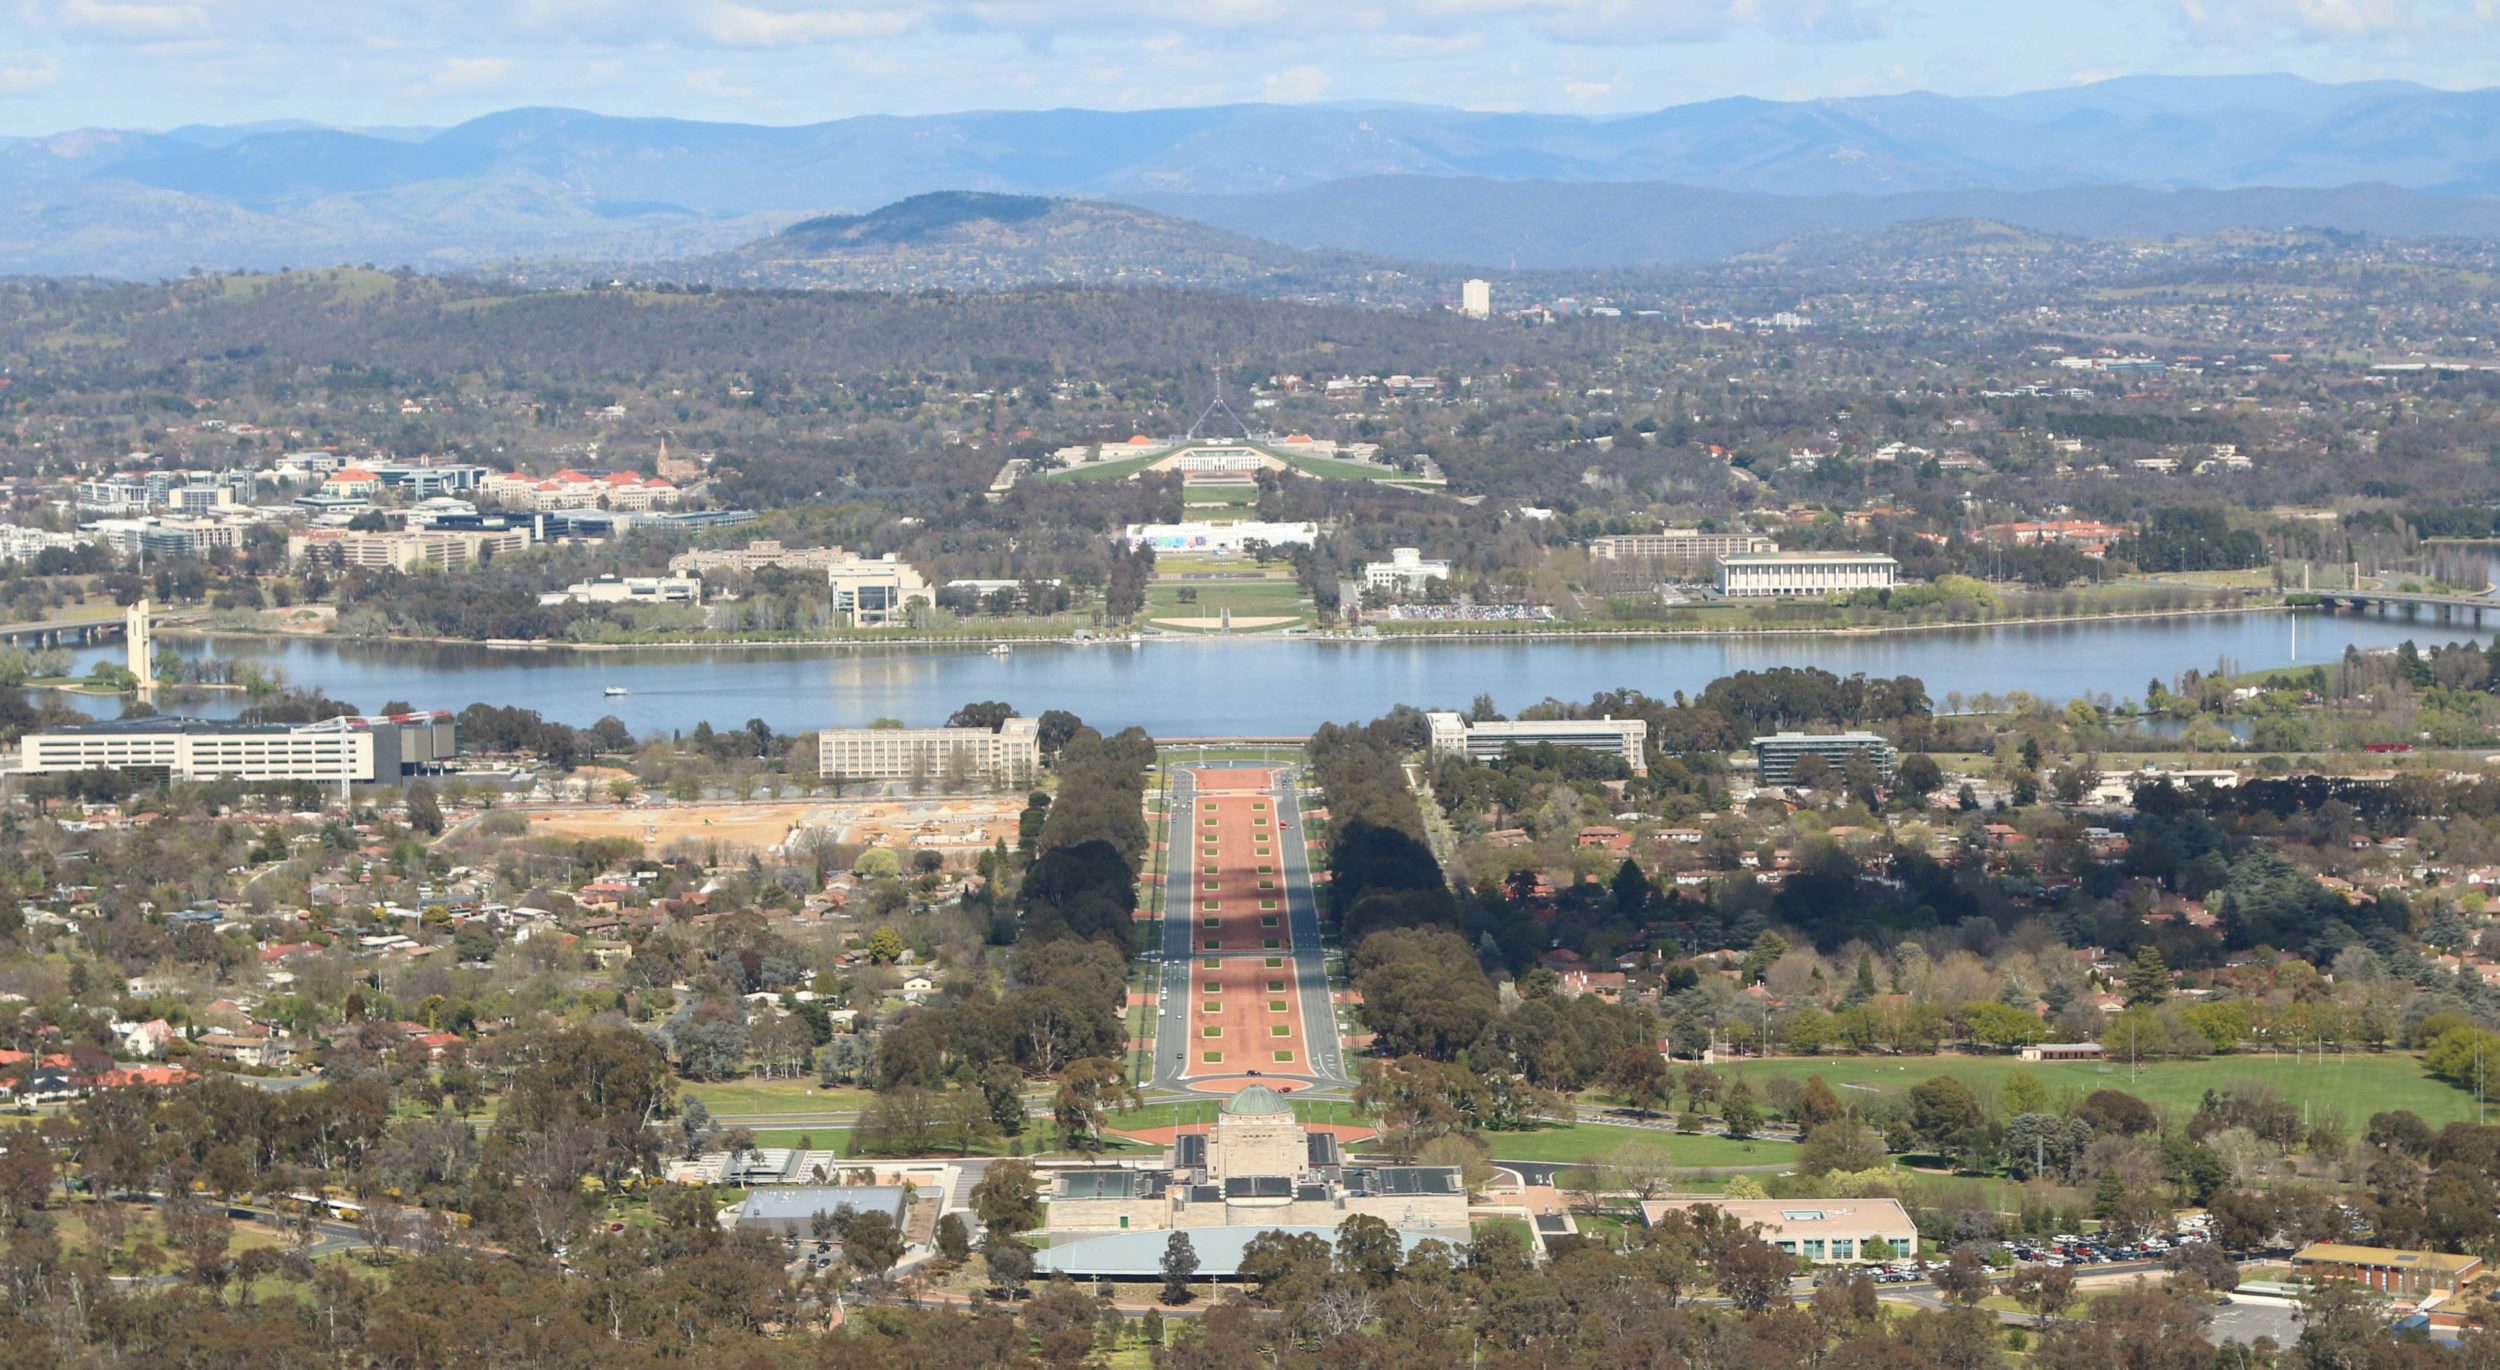 Via from Mt Ainslie over Canberra, with the Australian War Memorial and Parliment House